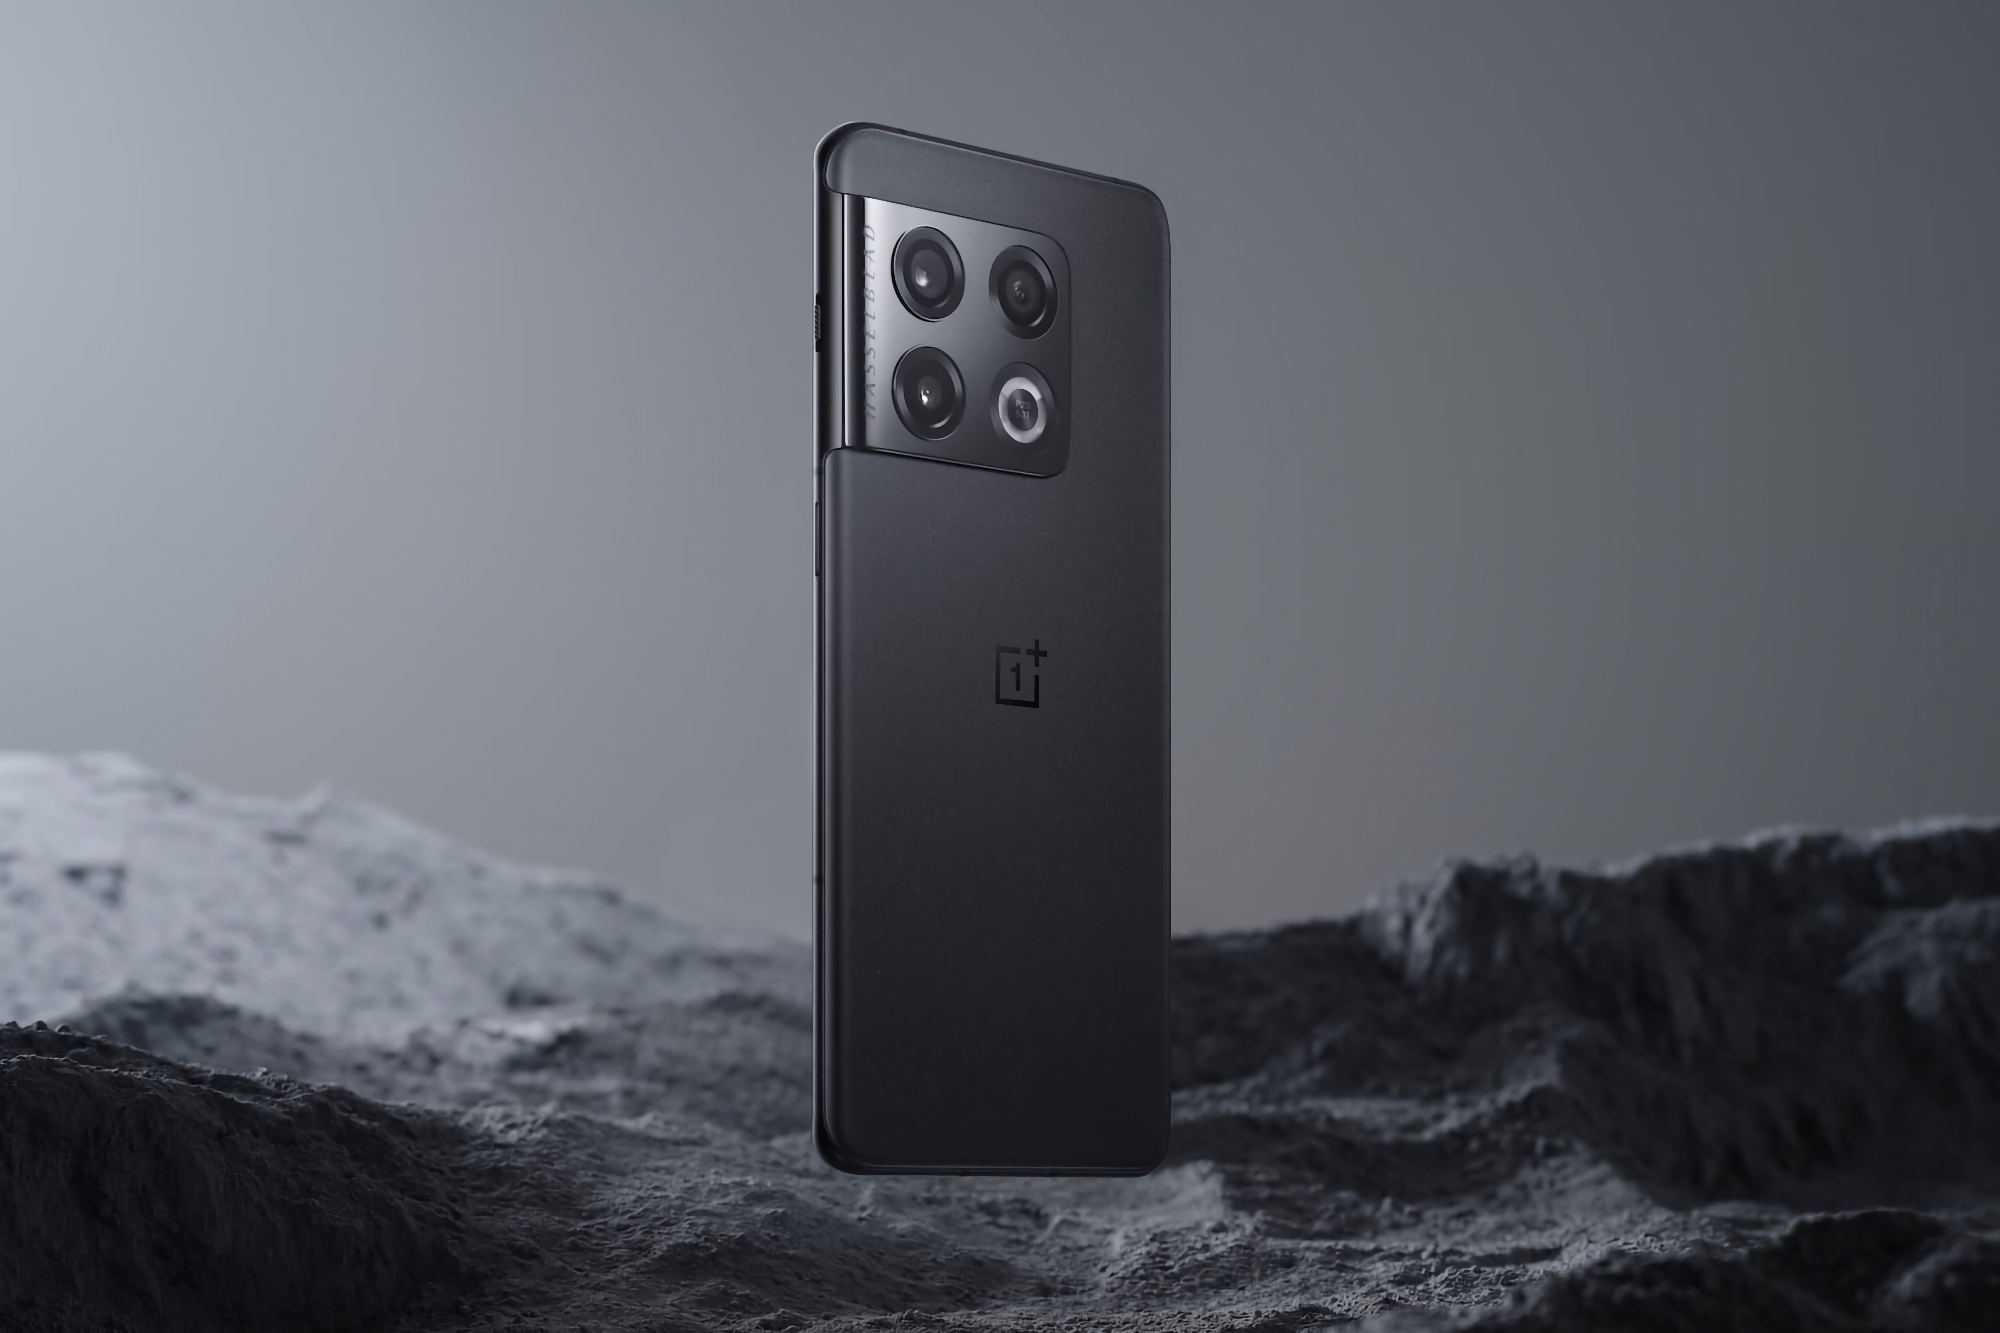 OnePlus 10 Pro with Snapdragon 8 Gen 1 chip and Hasselblad camera on sale on Amazon for $254 off